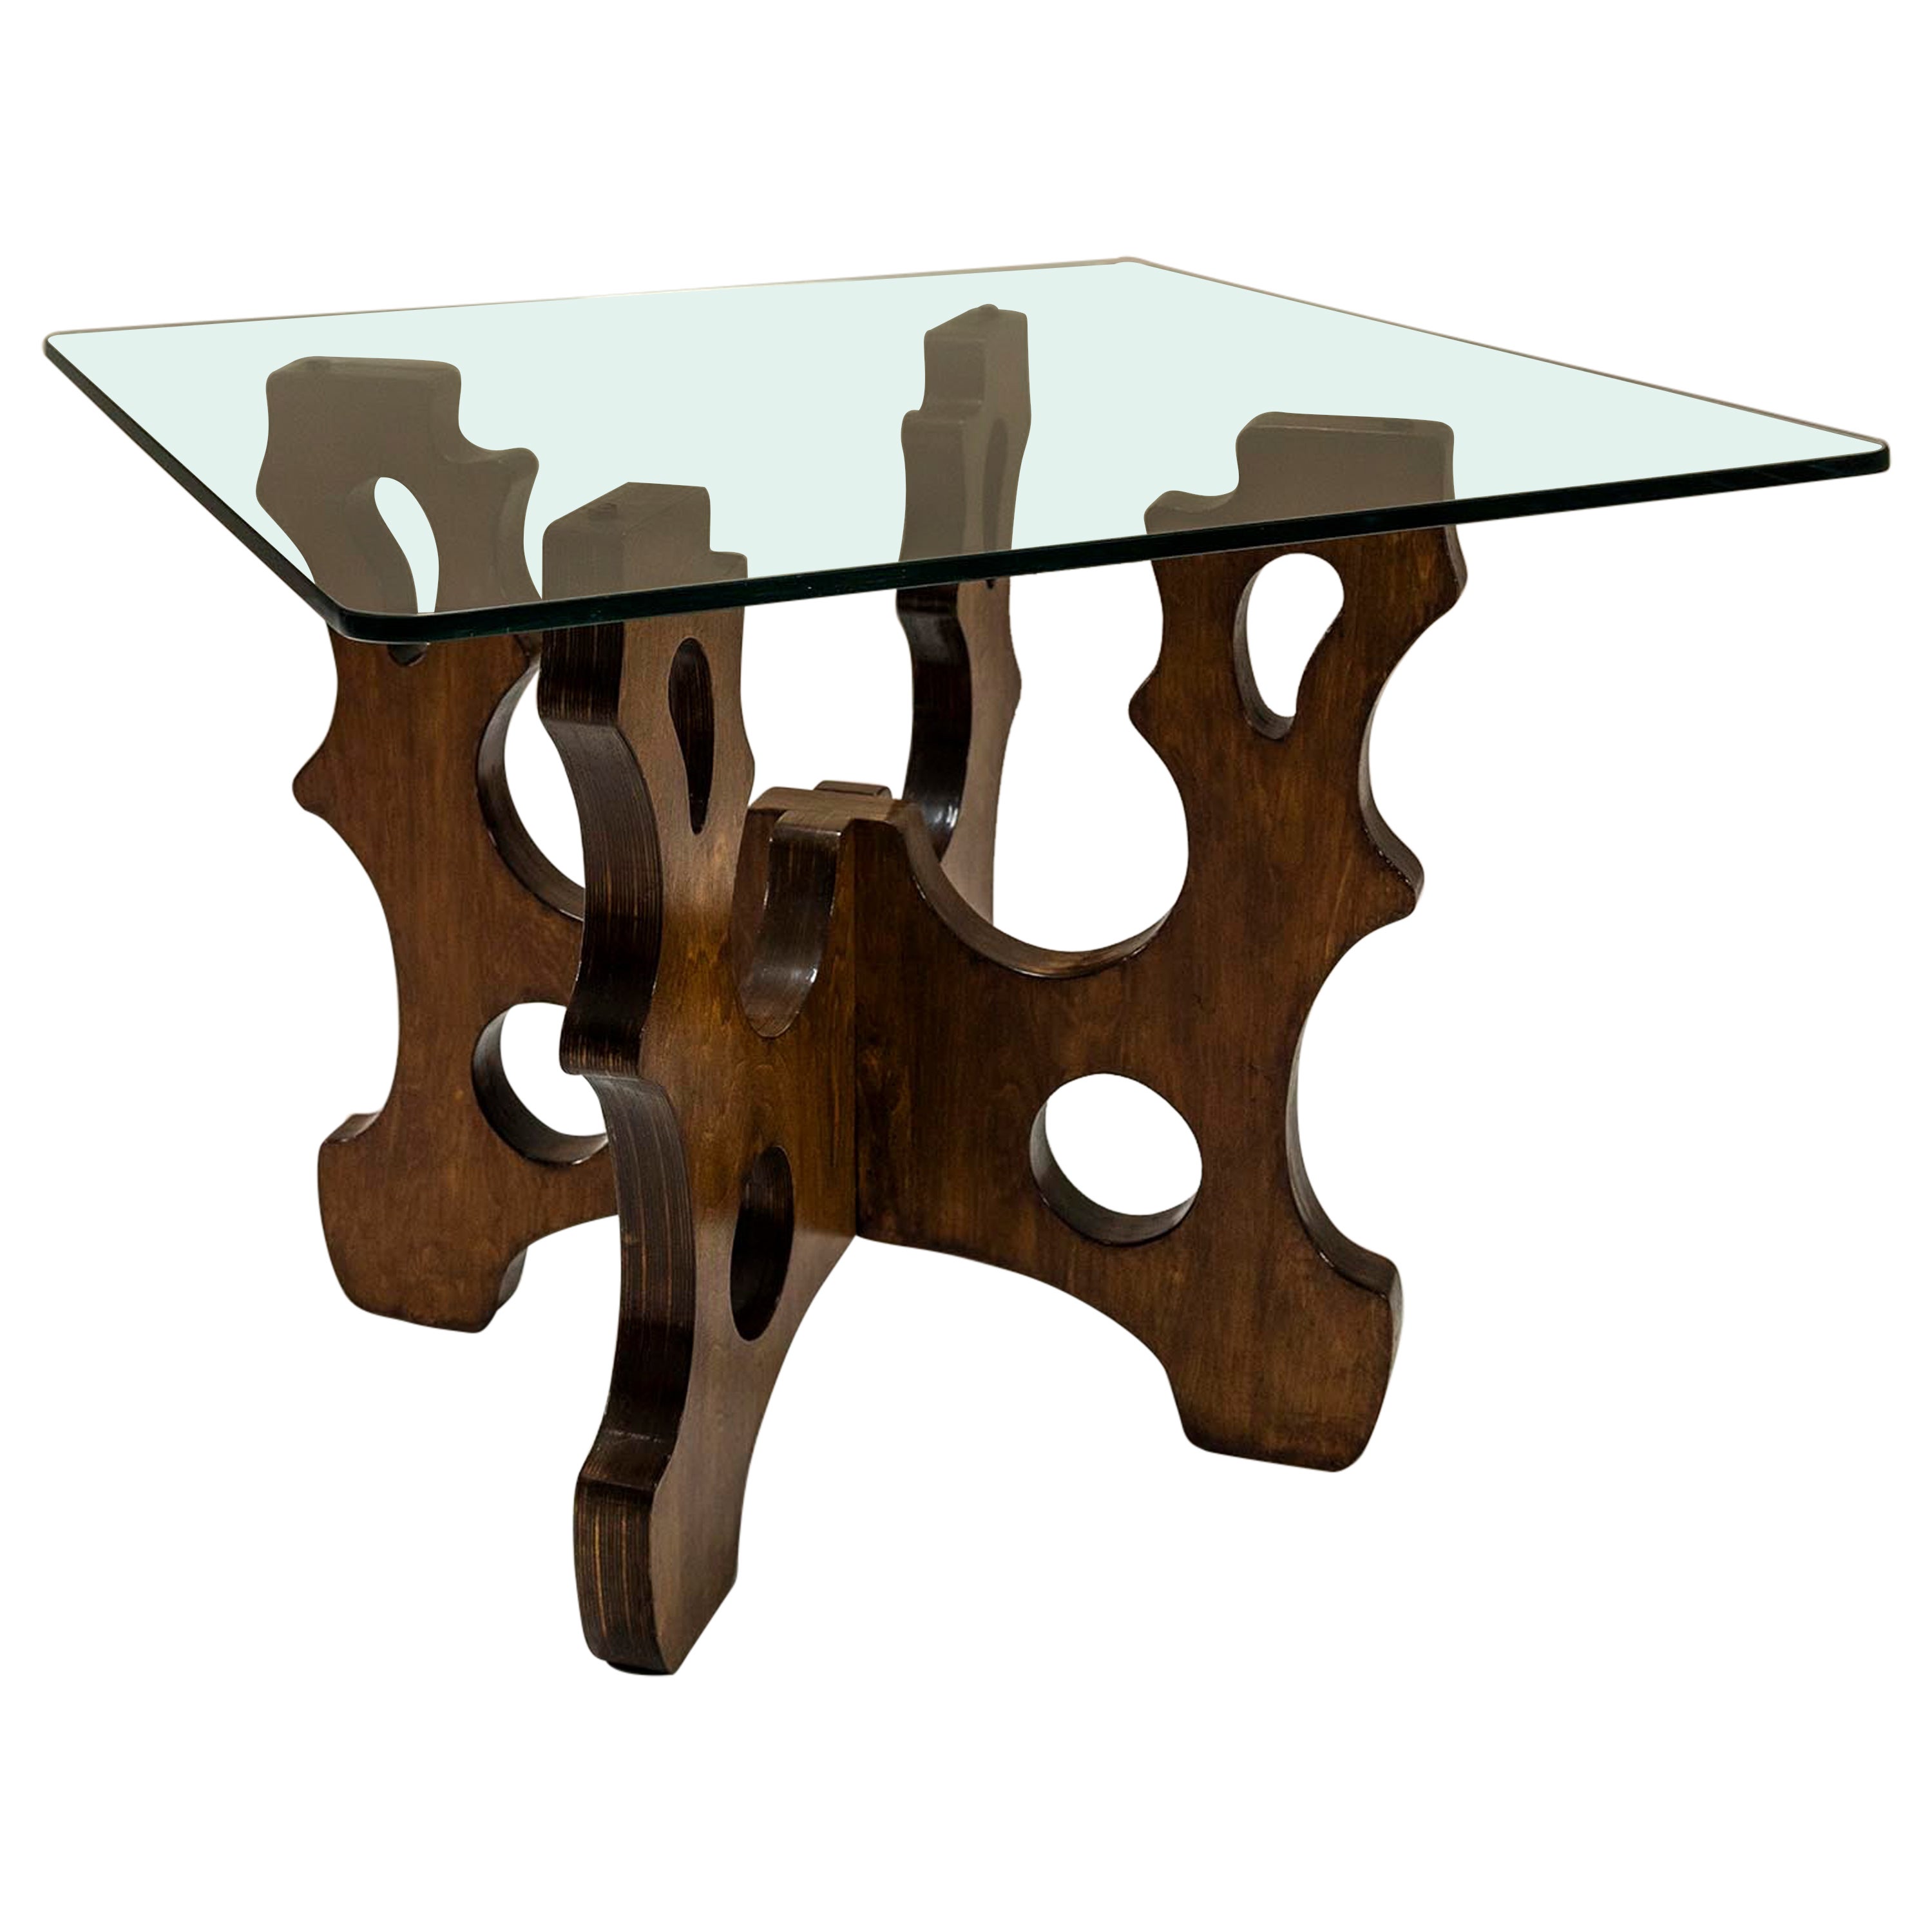 Sculptural Dining Table In Beech And Glass, Italy 1970's For Sale